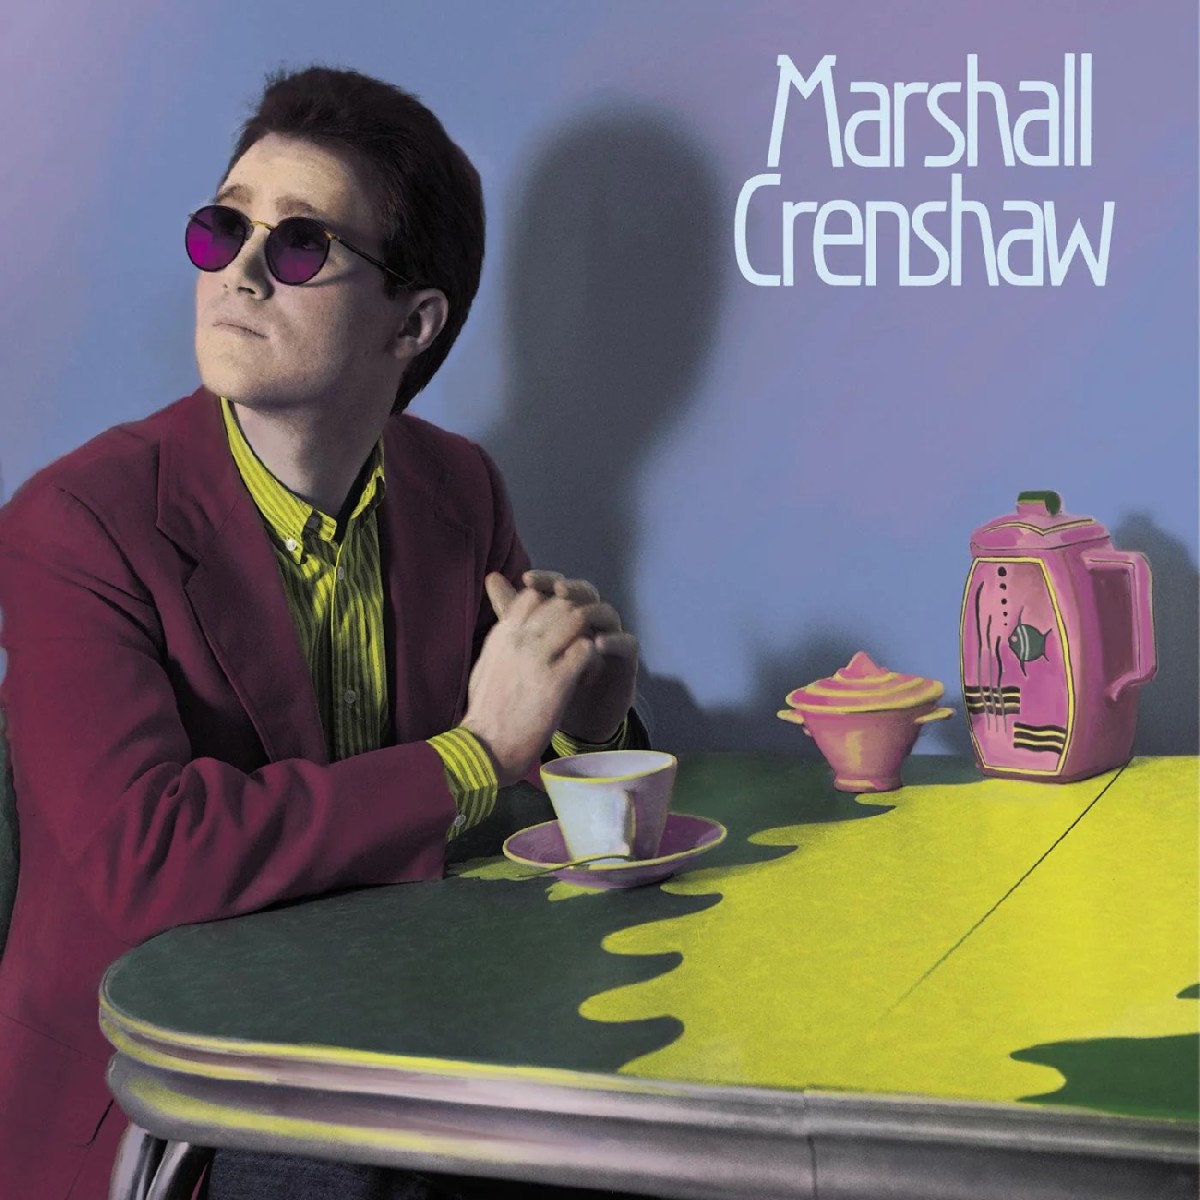 Get the 'MARSHALL CRENSHAW' CD (40th Anniversary, Deluxe Edition) in the Goldmine shop by clicking the image above.